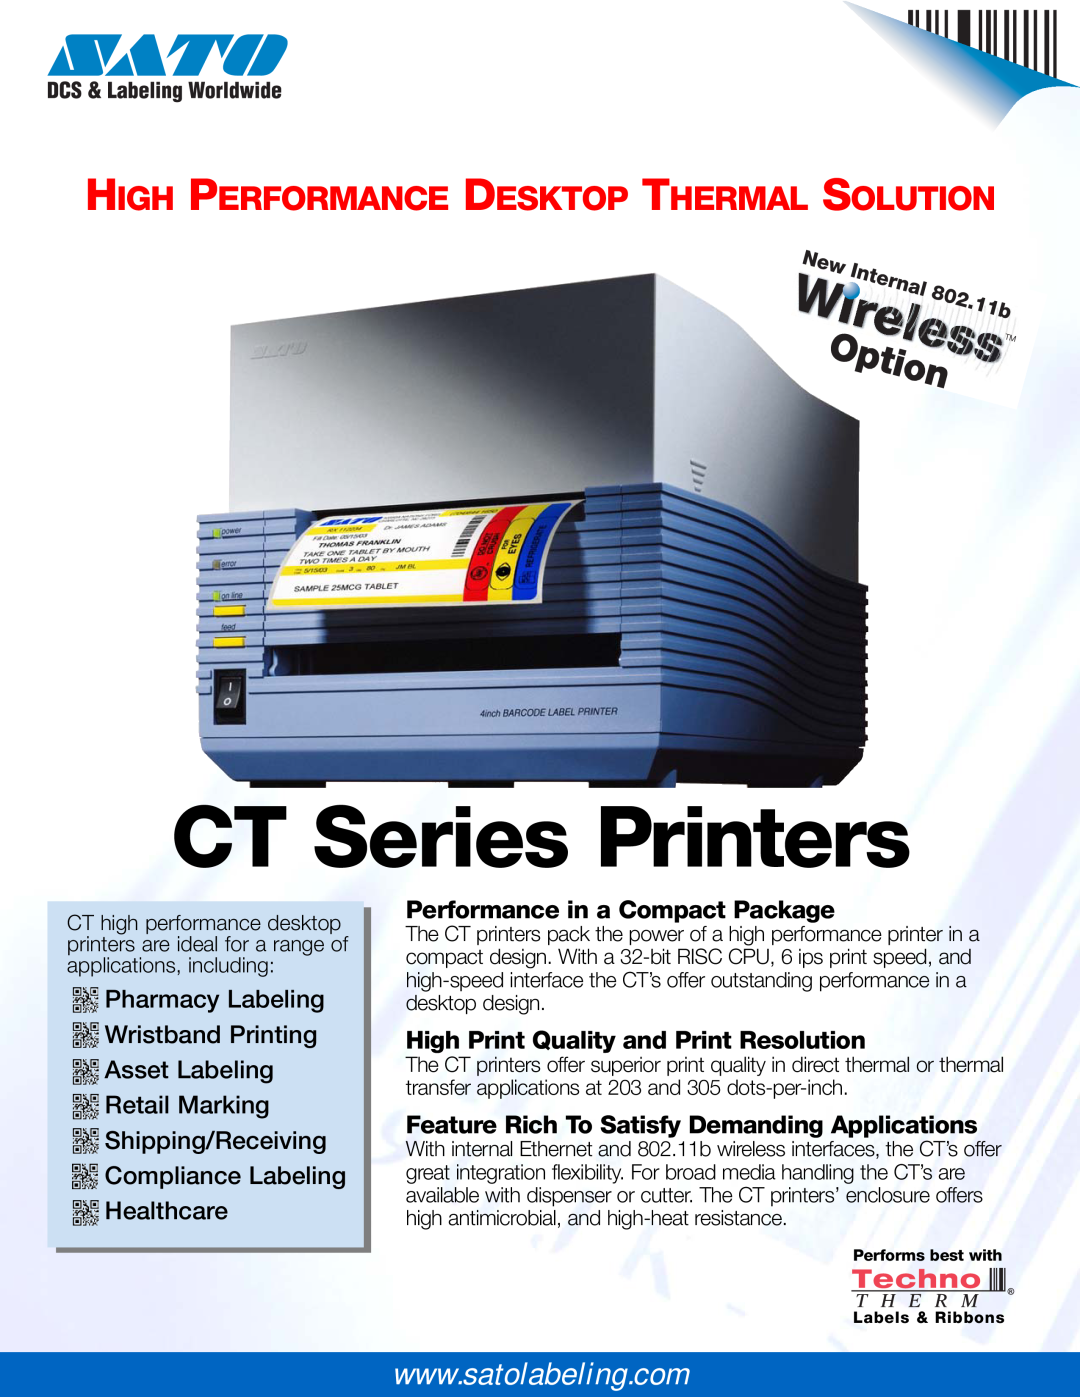 SATO manual CT Series Printers, High Performance Desktop Thermal Solution, Performance in a Compact Package 